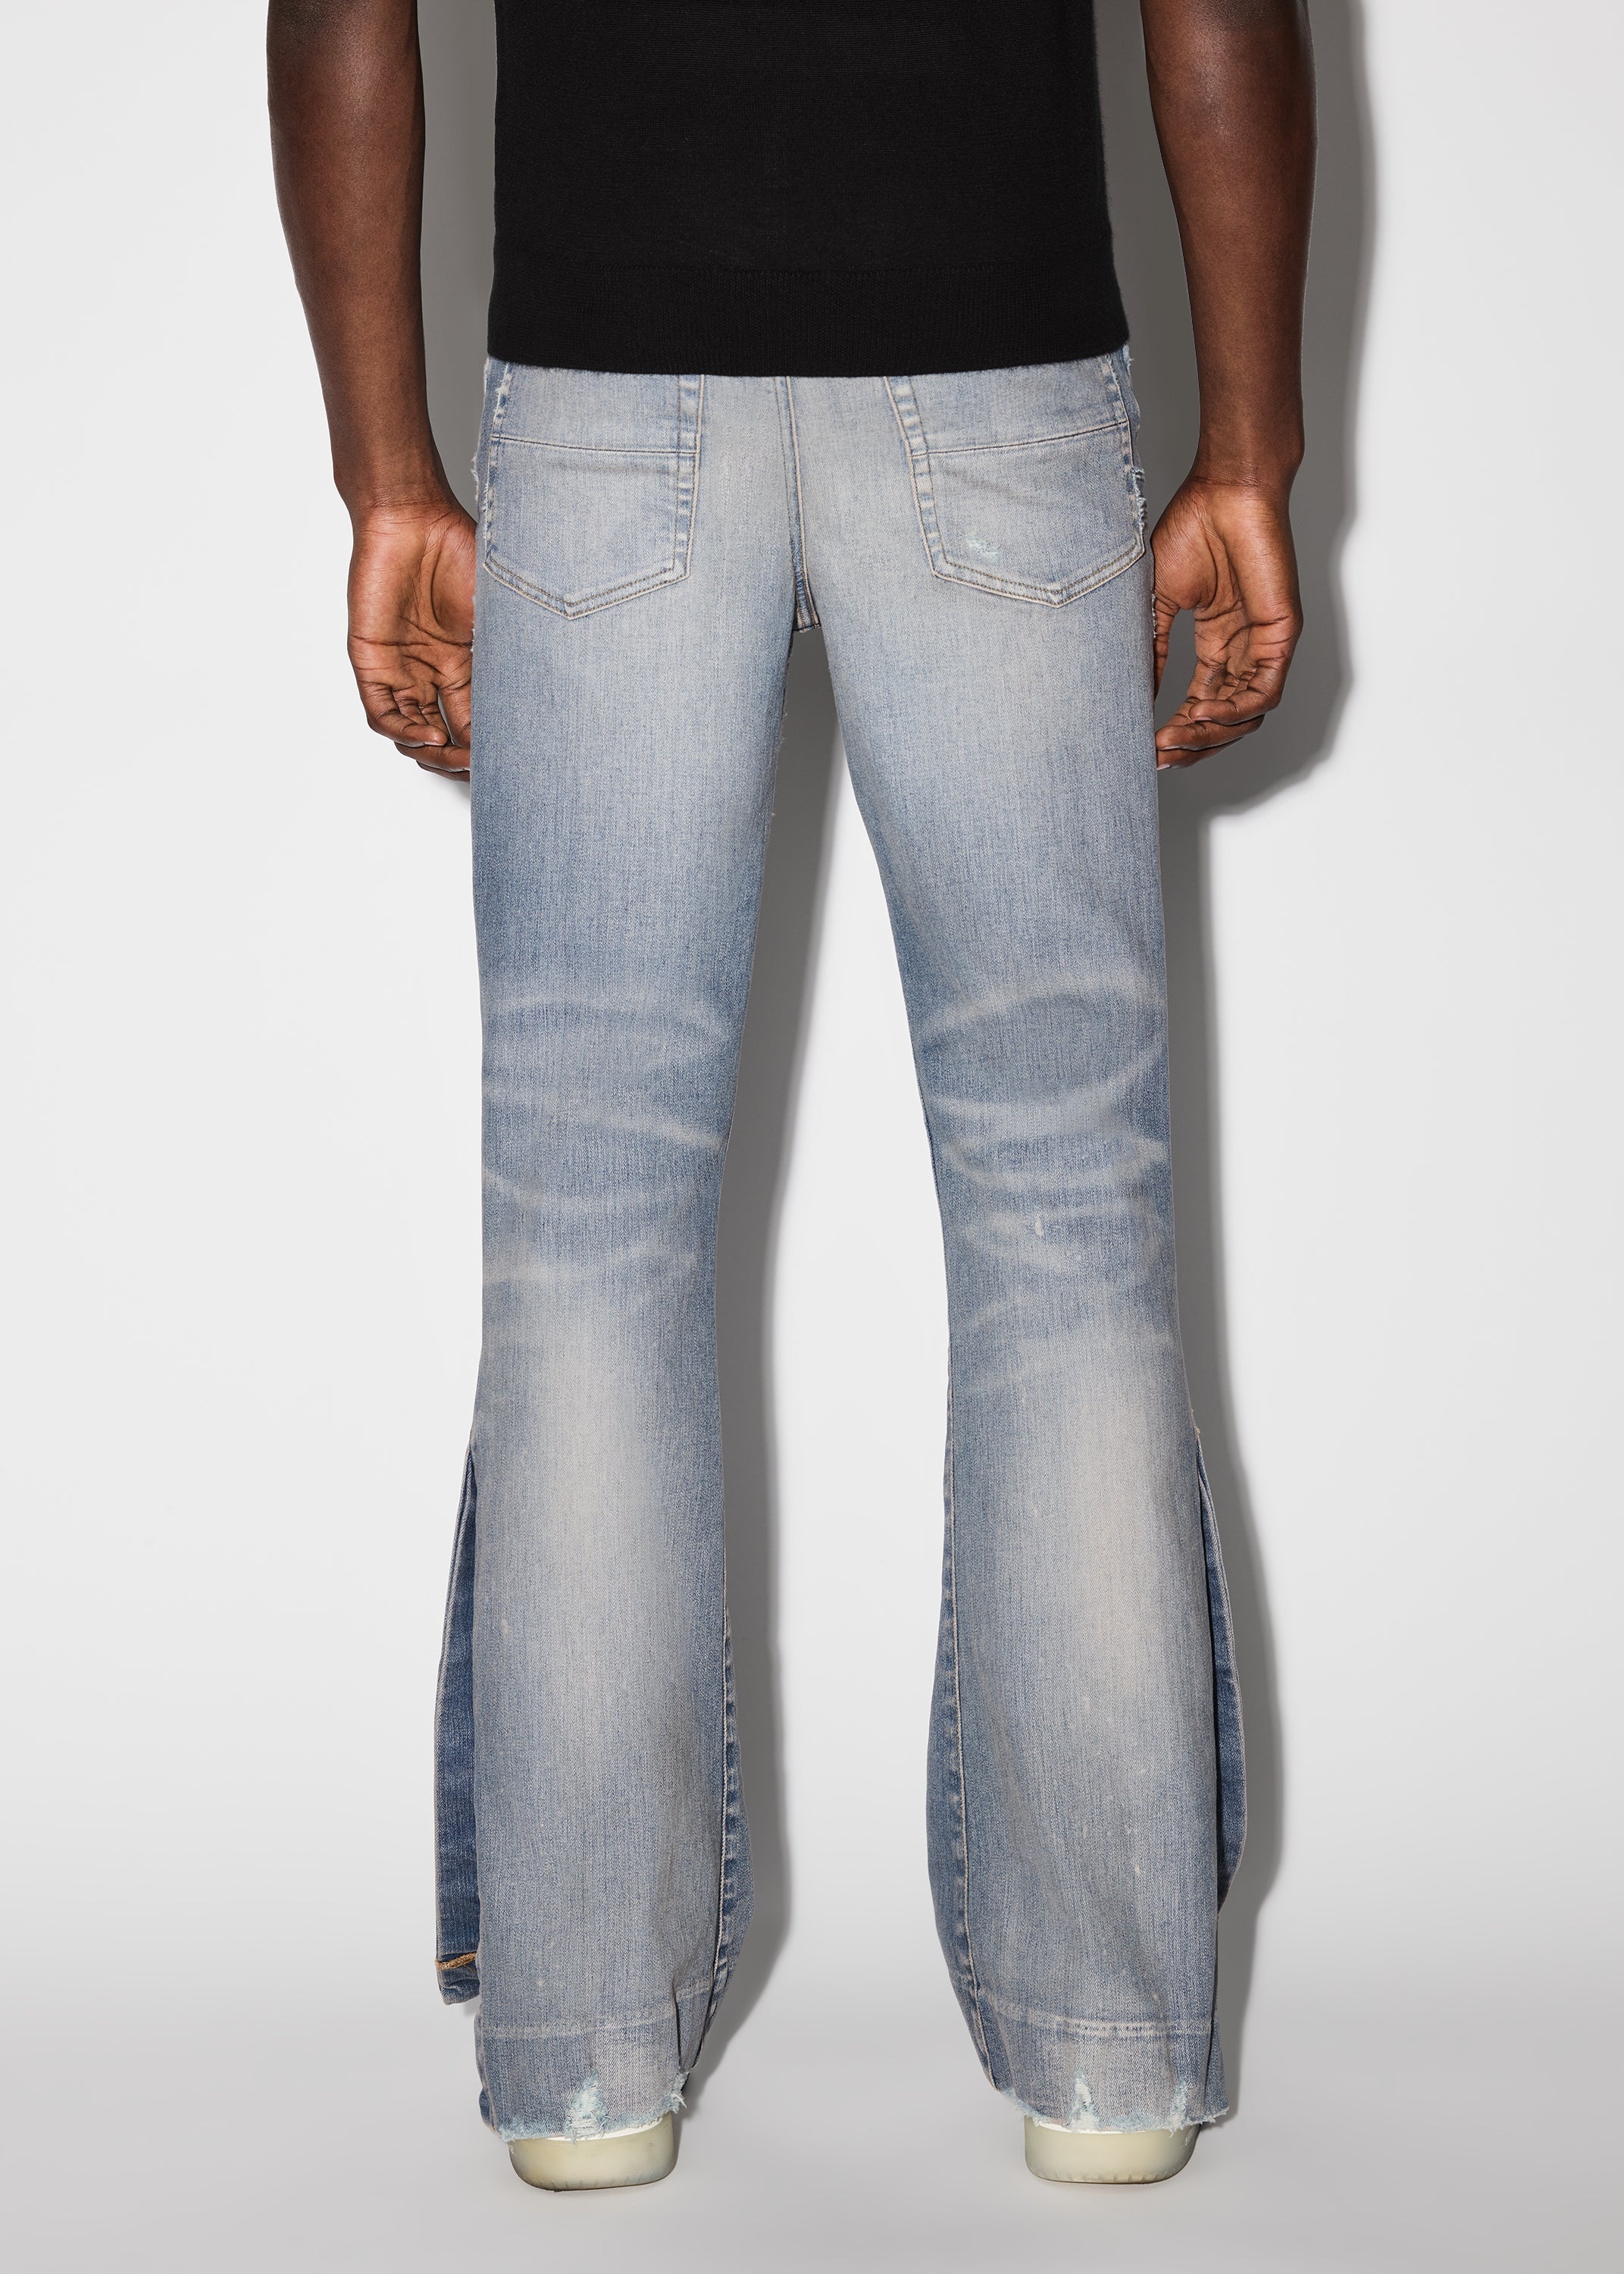 STACKED FLARE JEAN - 4